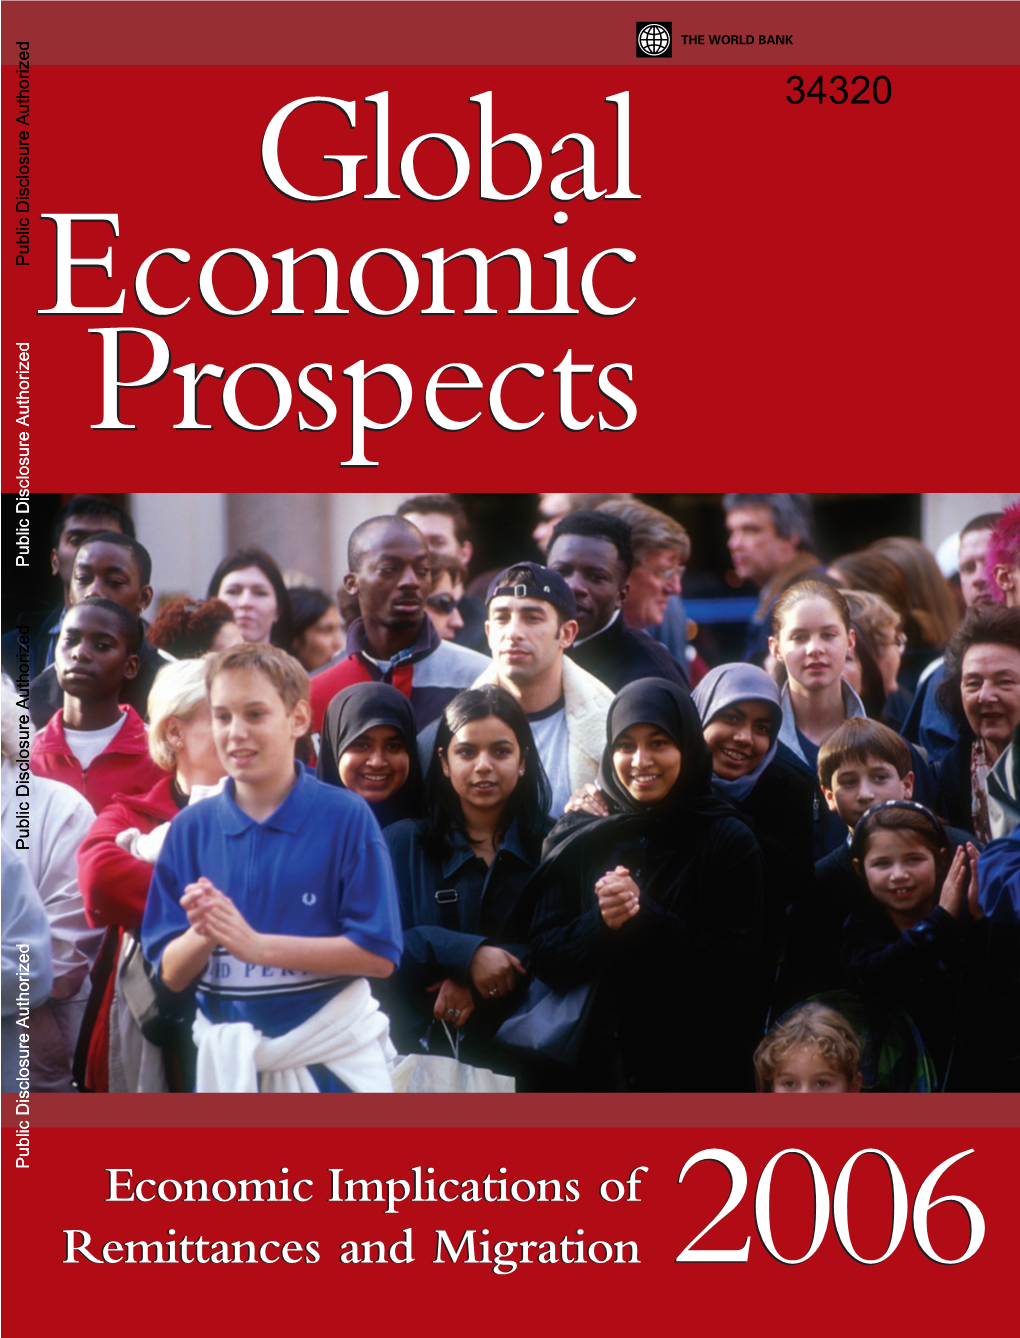 Global Economic Prospects 2006 Shows the Prospects for Migration Flows Are Crit- How Sound Domestic Policies and an Invest- Ical for Development